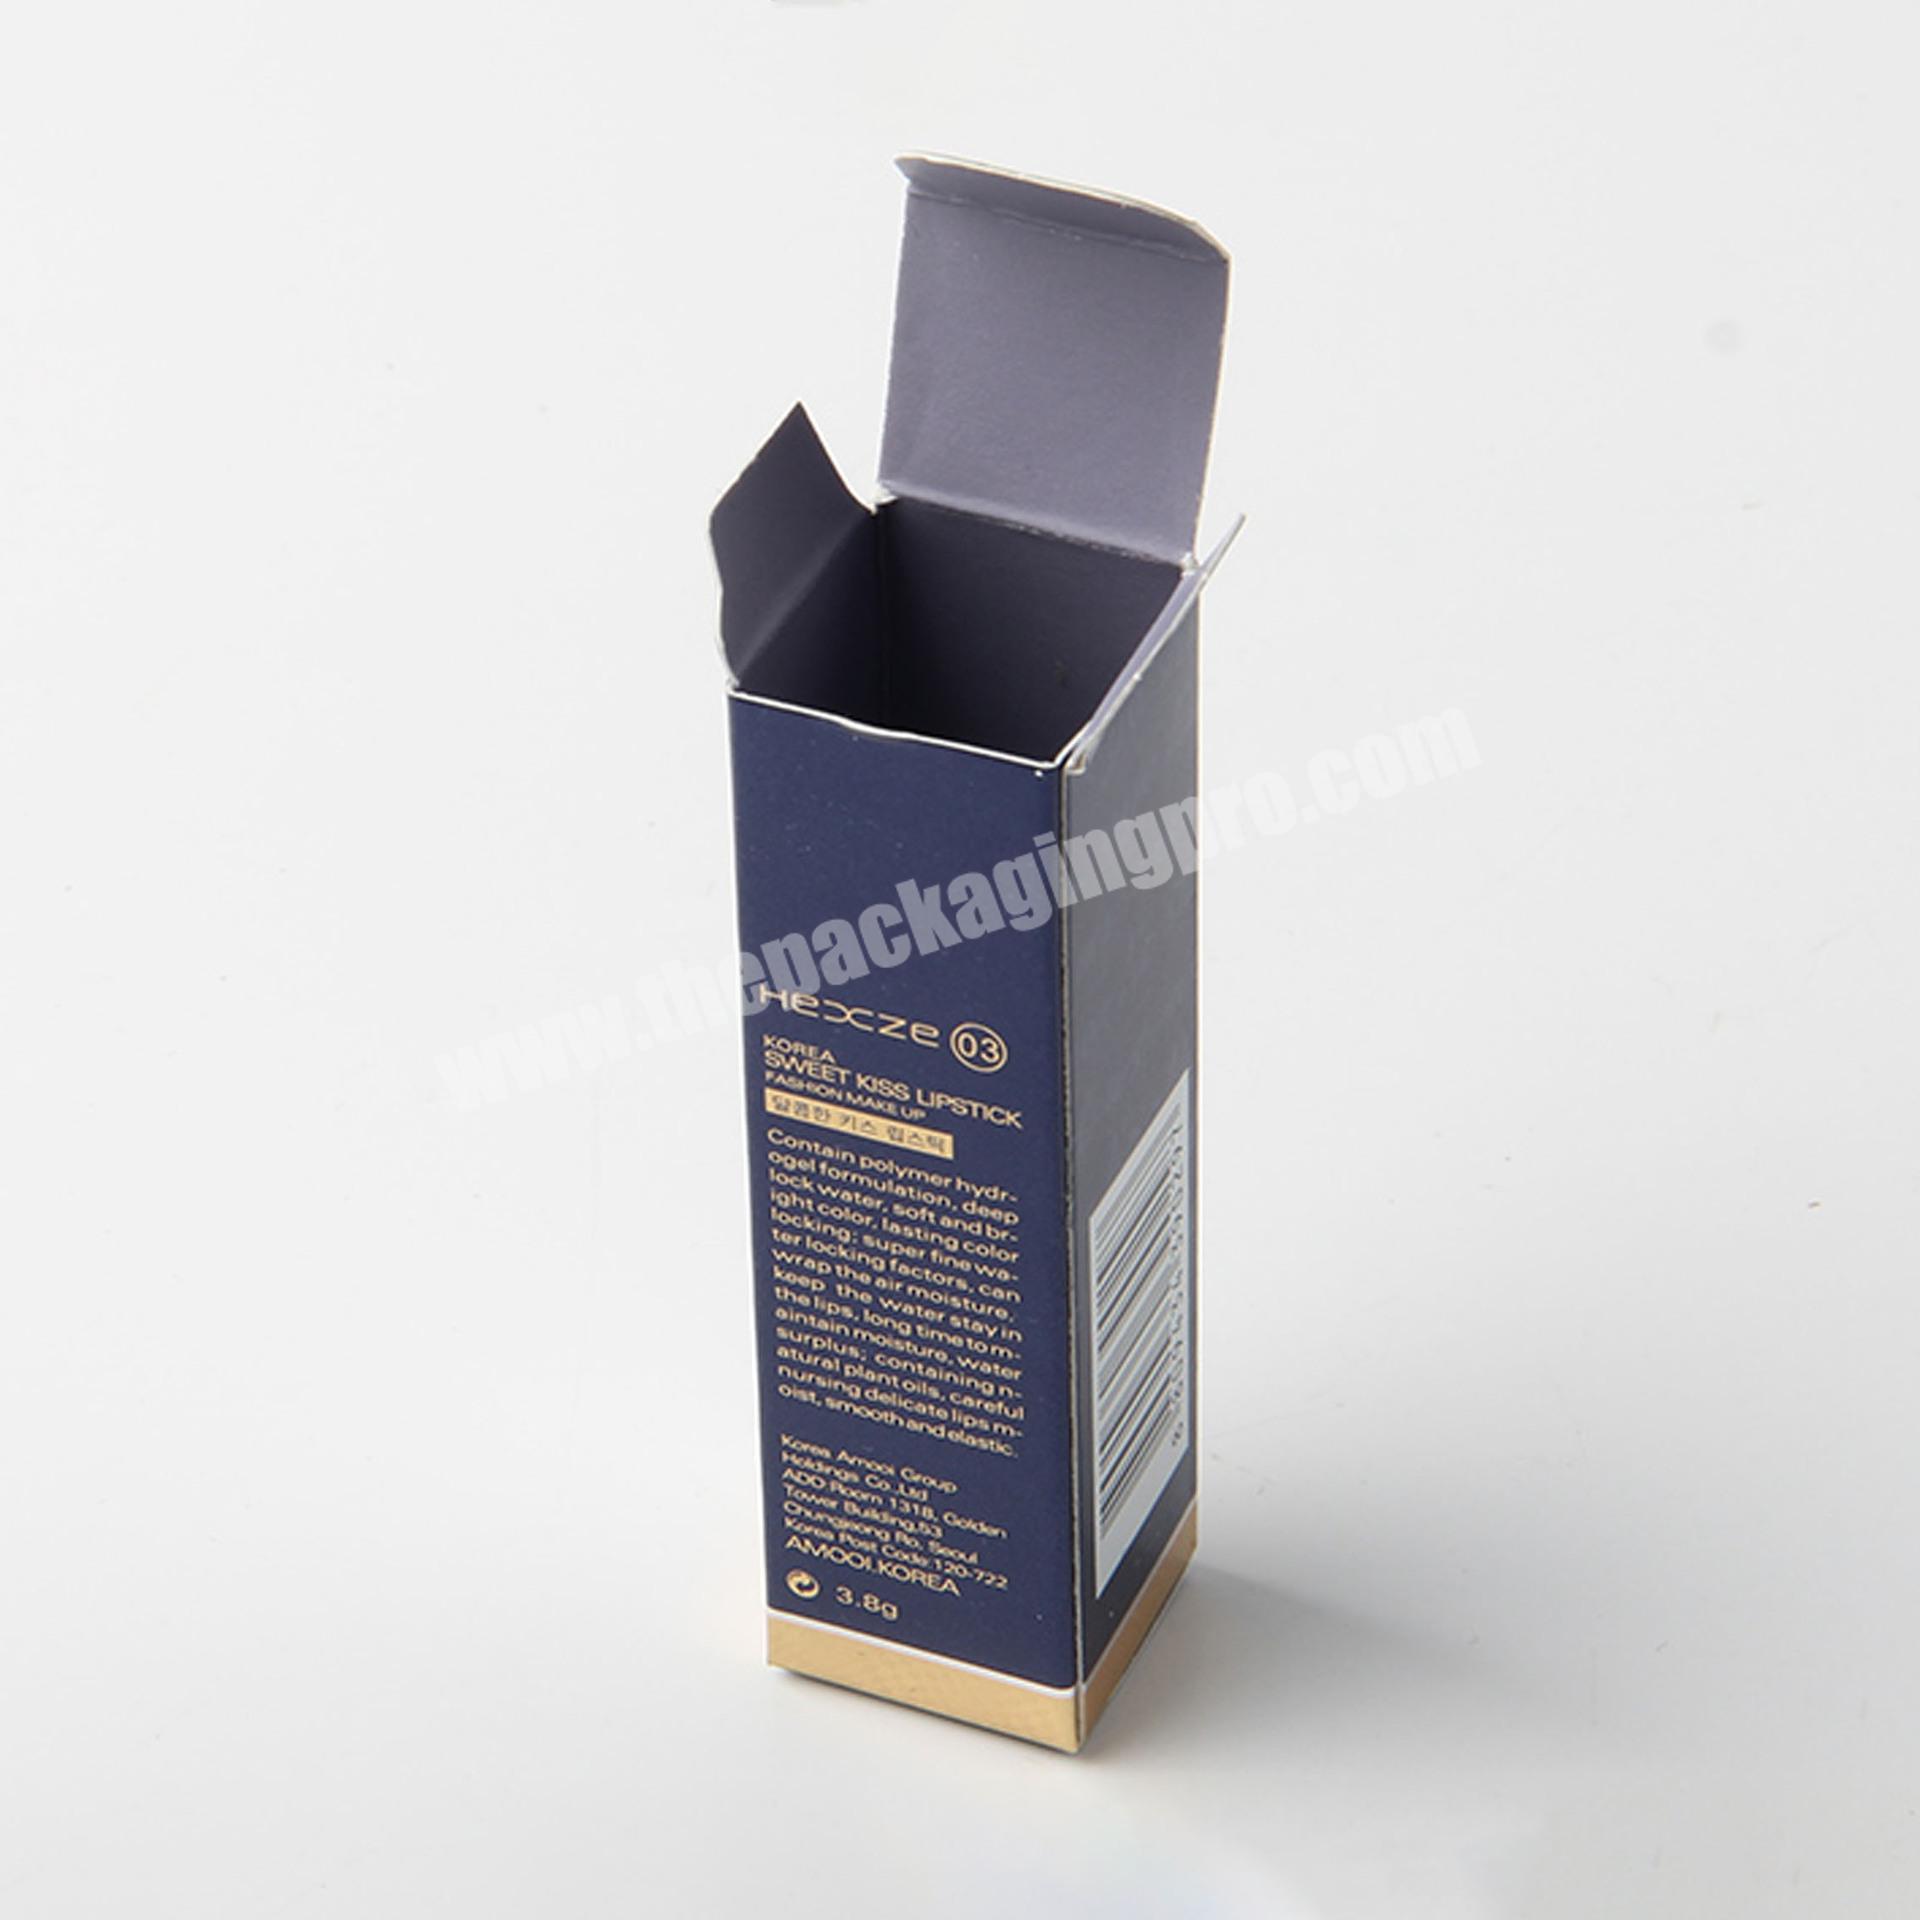 Customized Product Packaging Small White Box Packaging White Paper Box Cardboard Box